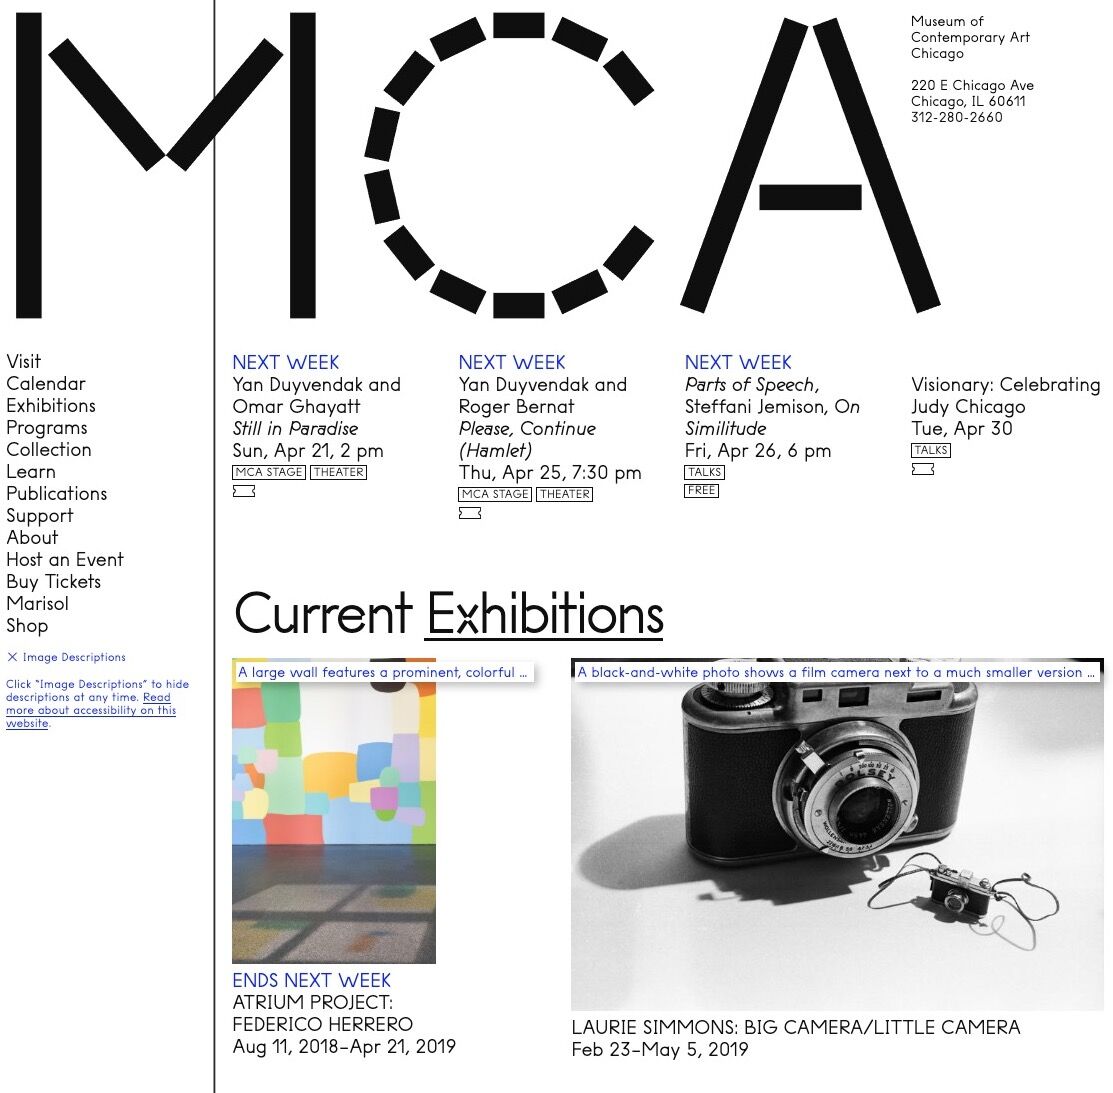 Details of the MCA's homepage showcasing Coyote image descriptions. © MCA Chicago.